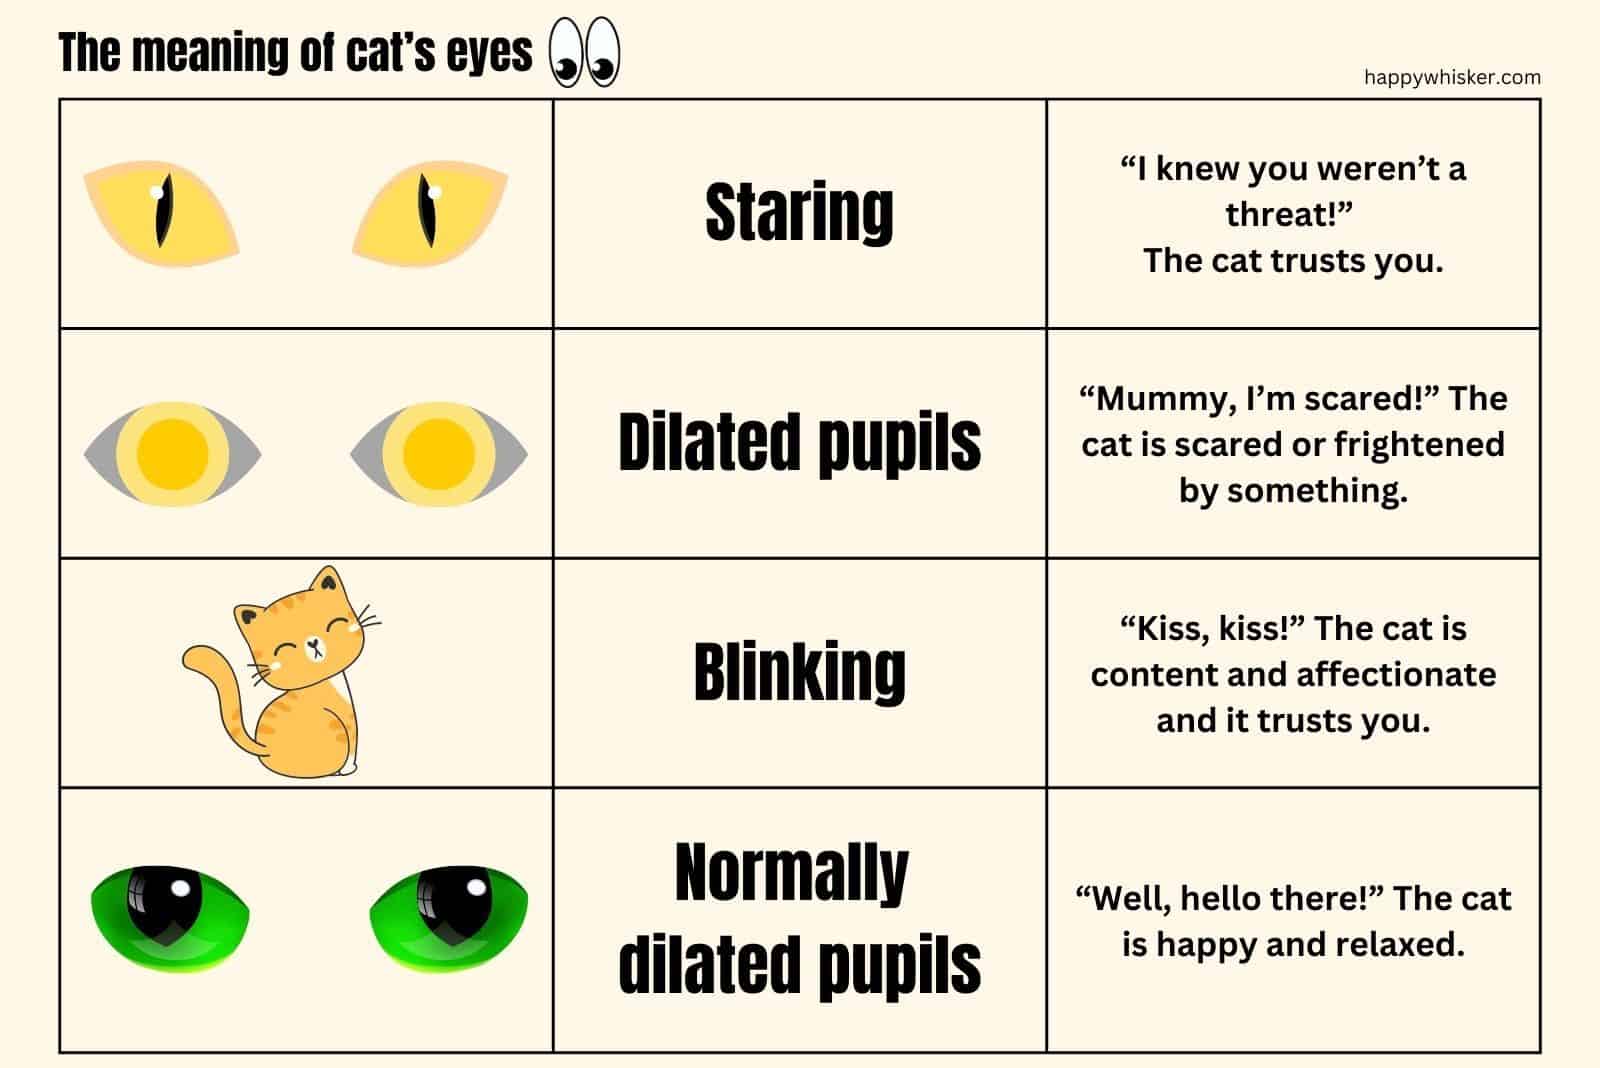 The meaning of cat’s eyes